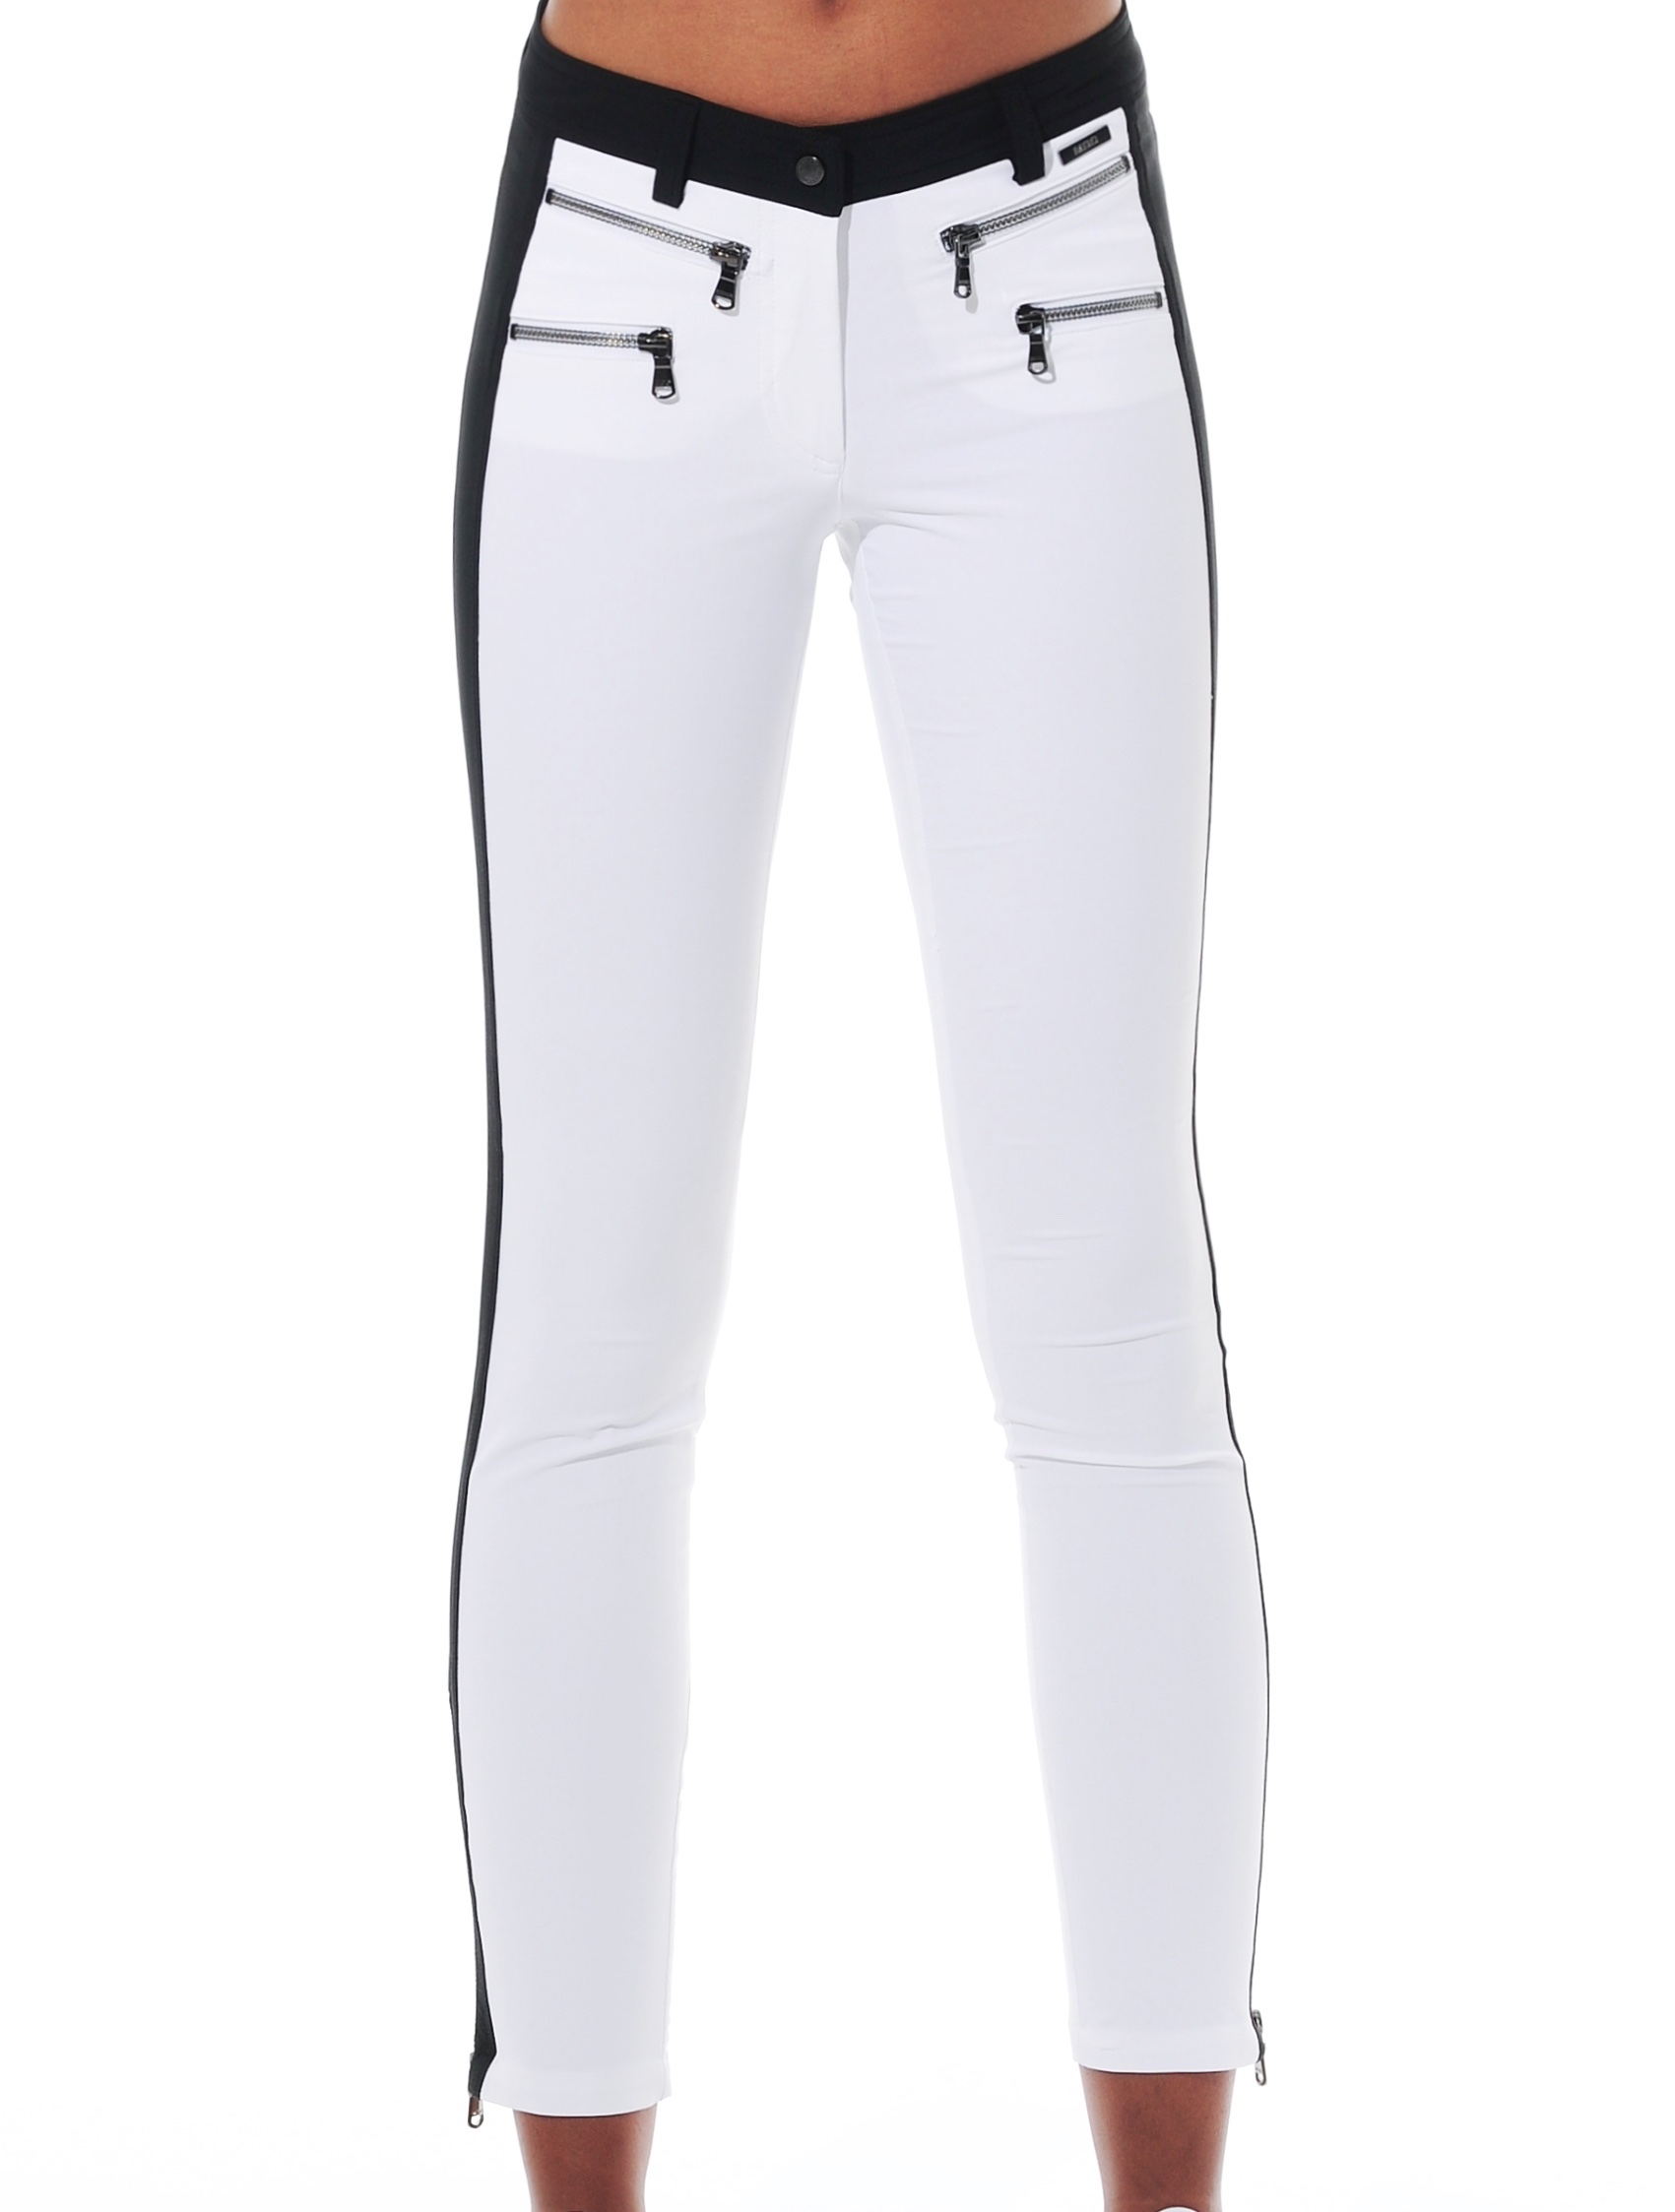 4way stretch double zip ankle pants white/black 